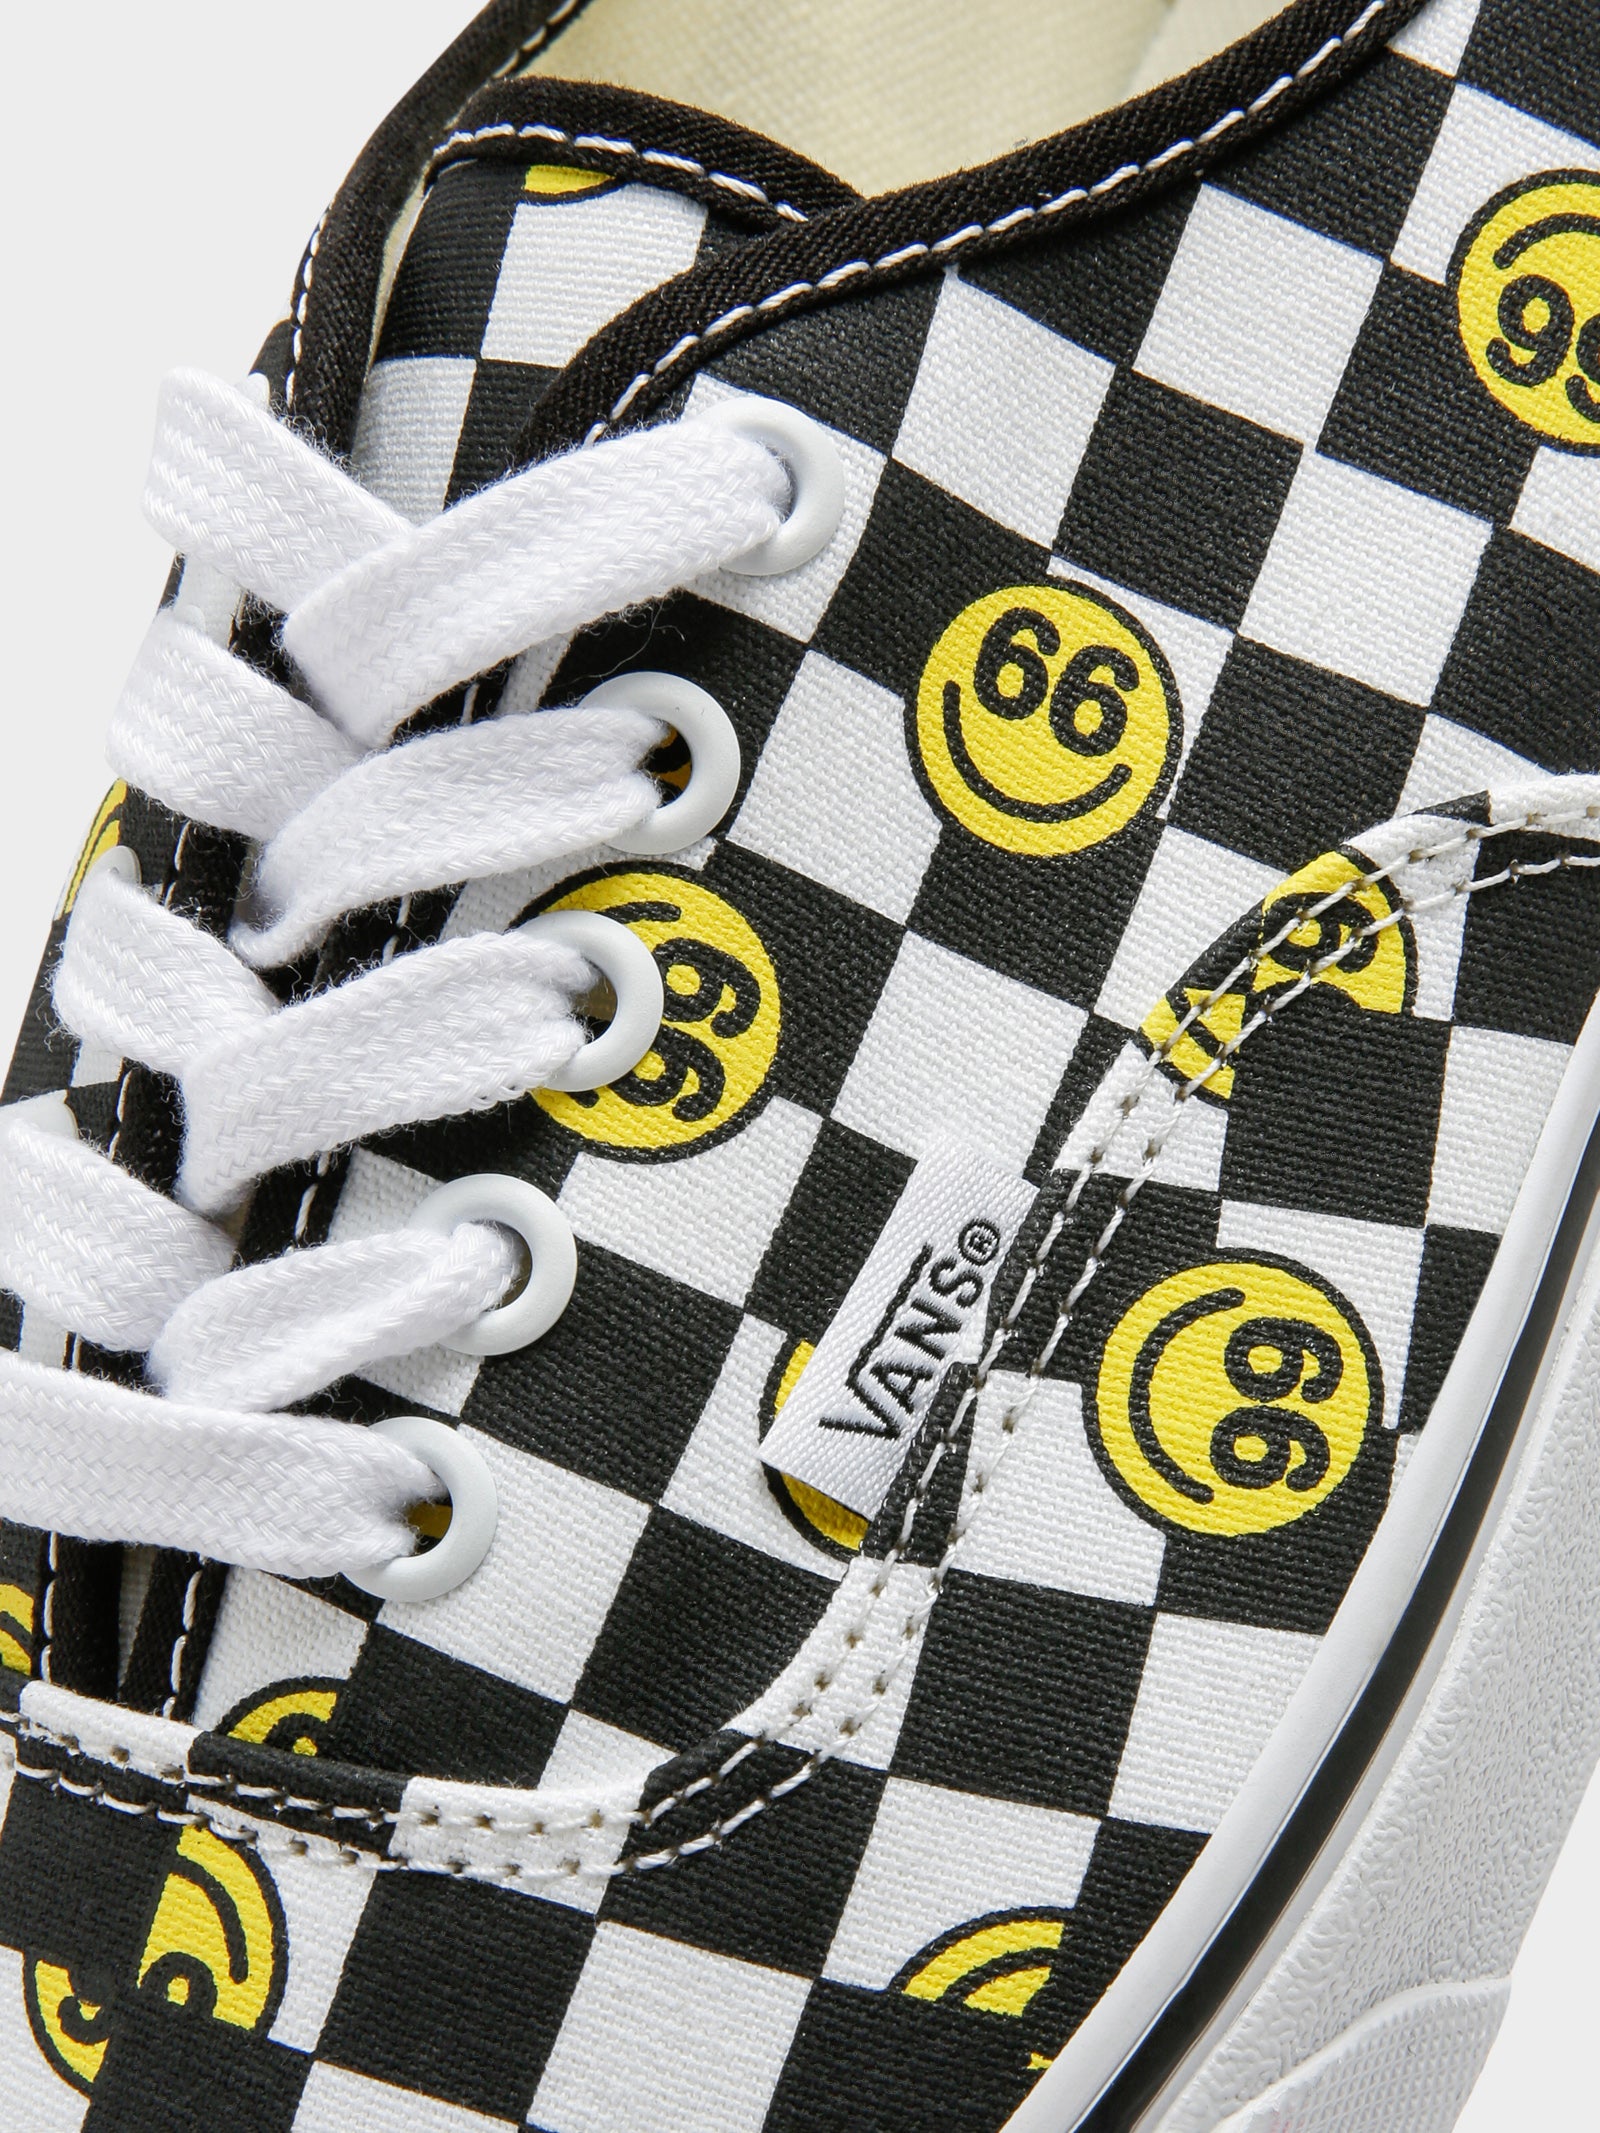 Unisex Authentic Smiley Sneakers in Black & White